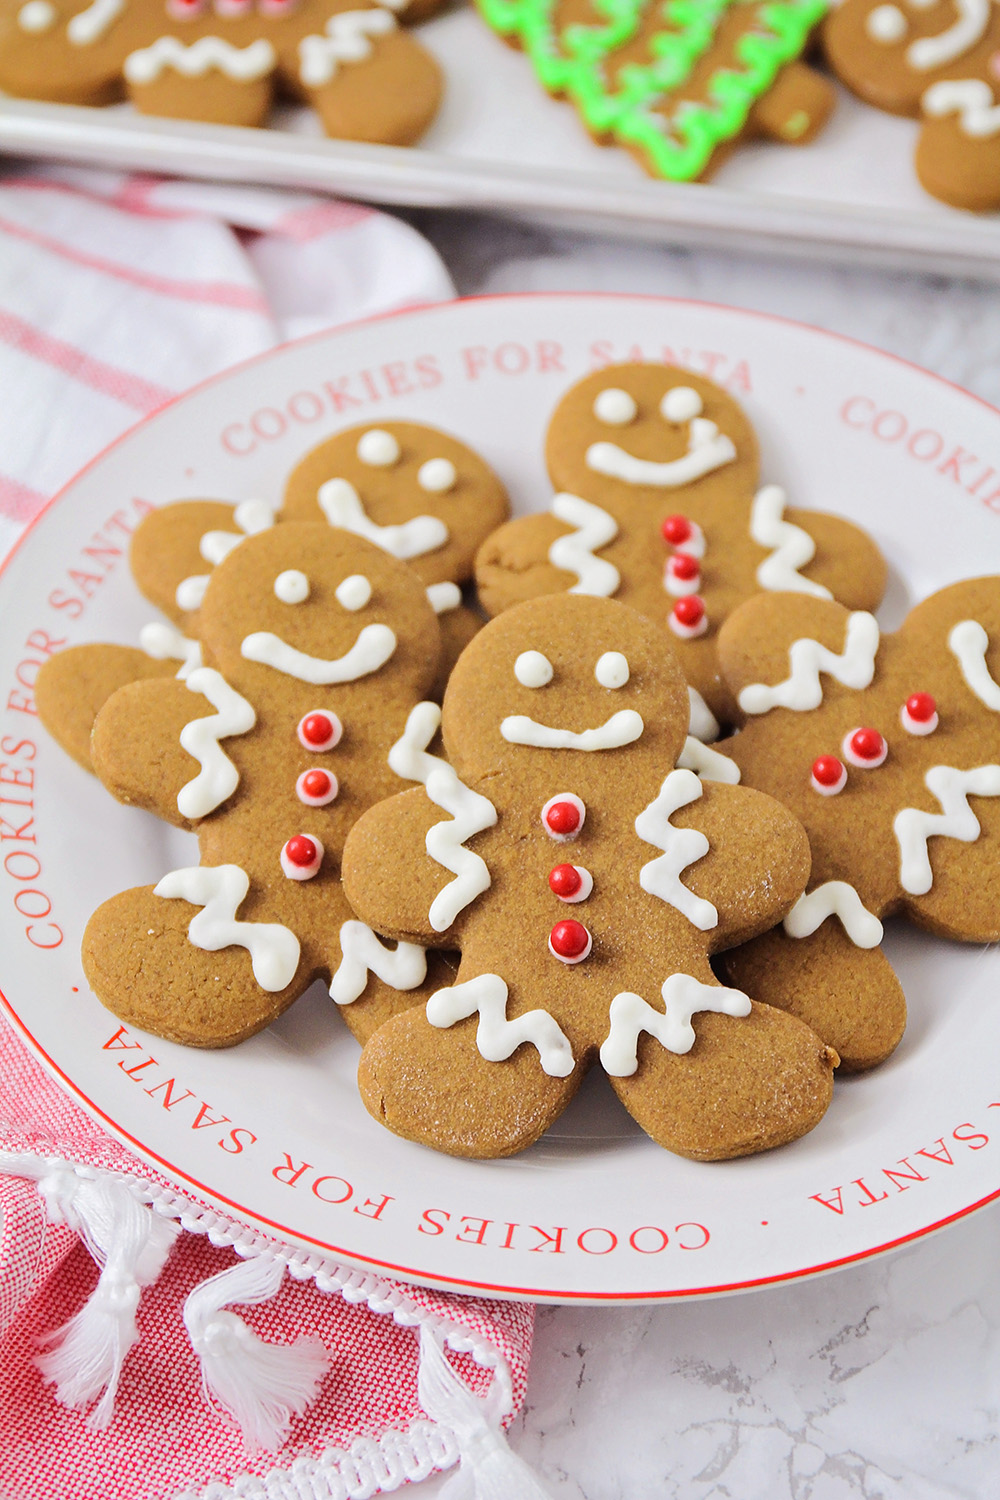 These soft and thick gingerbread cookies have the perfect lightly spiced gingerbread flavor, and are so delicious!